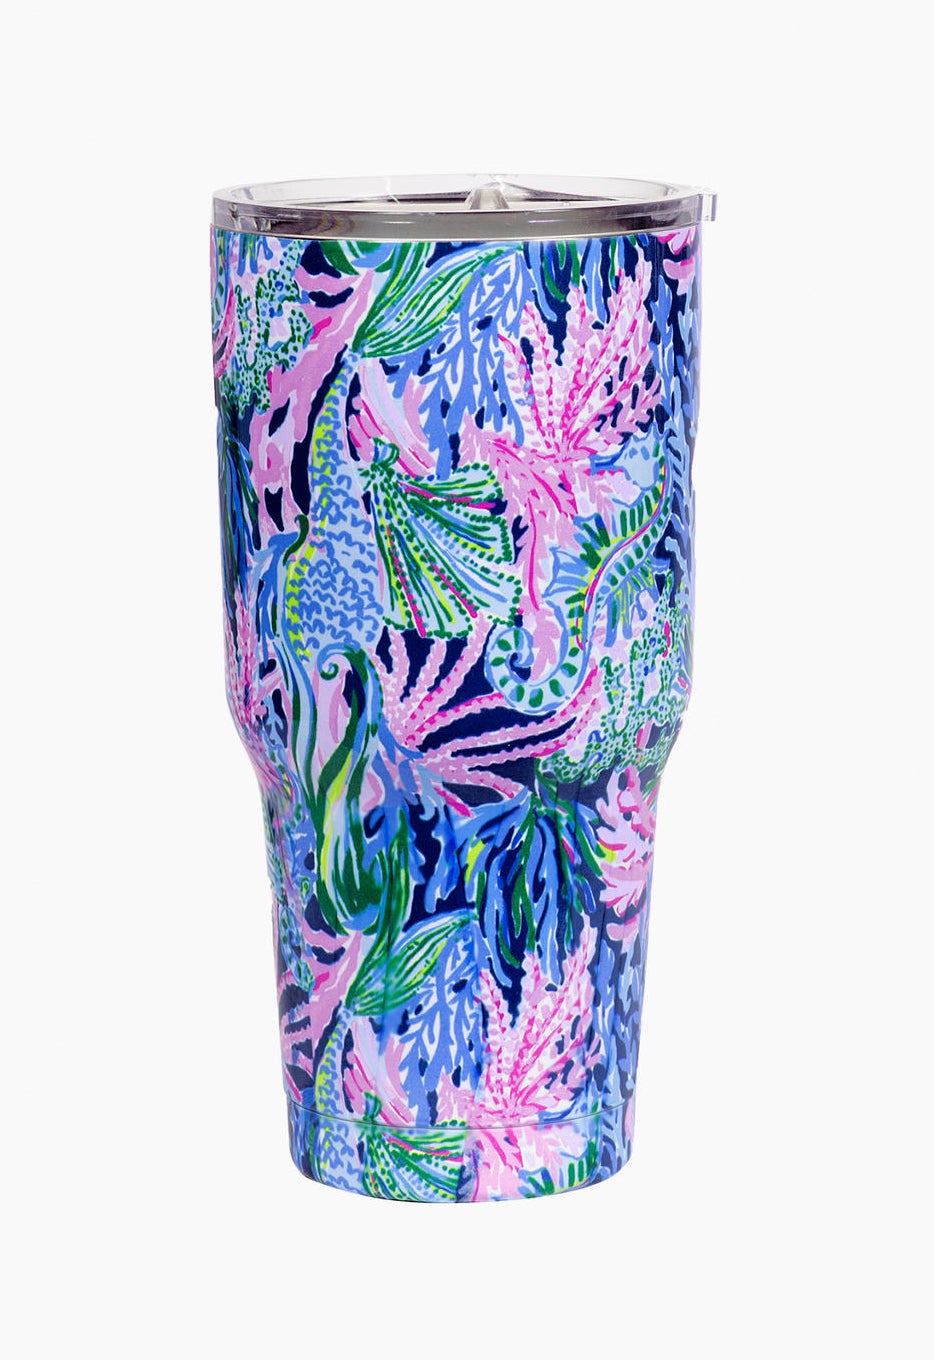 the tumbler with pink, blue, and green  sea plant pattern all over it